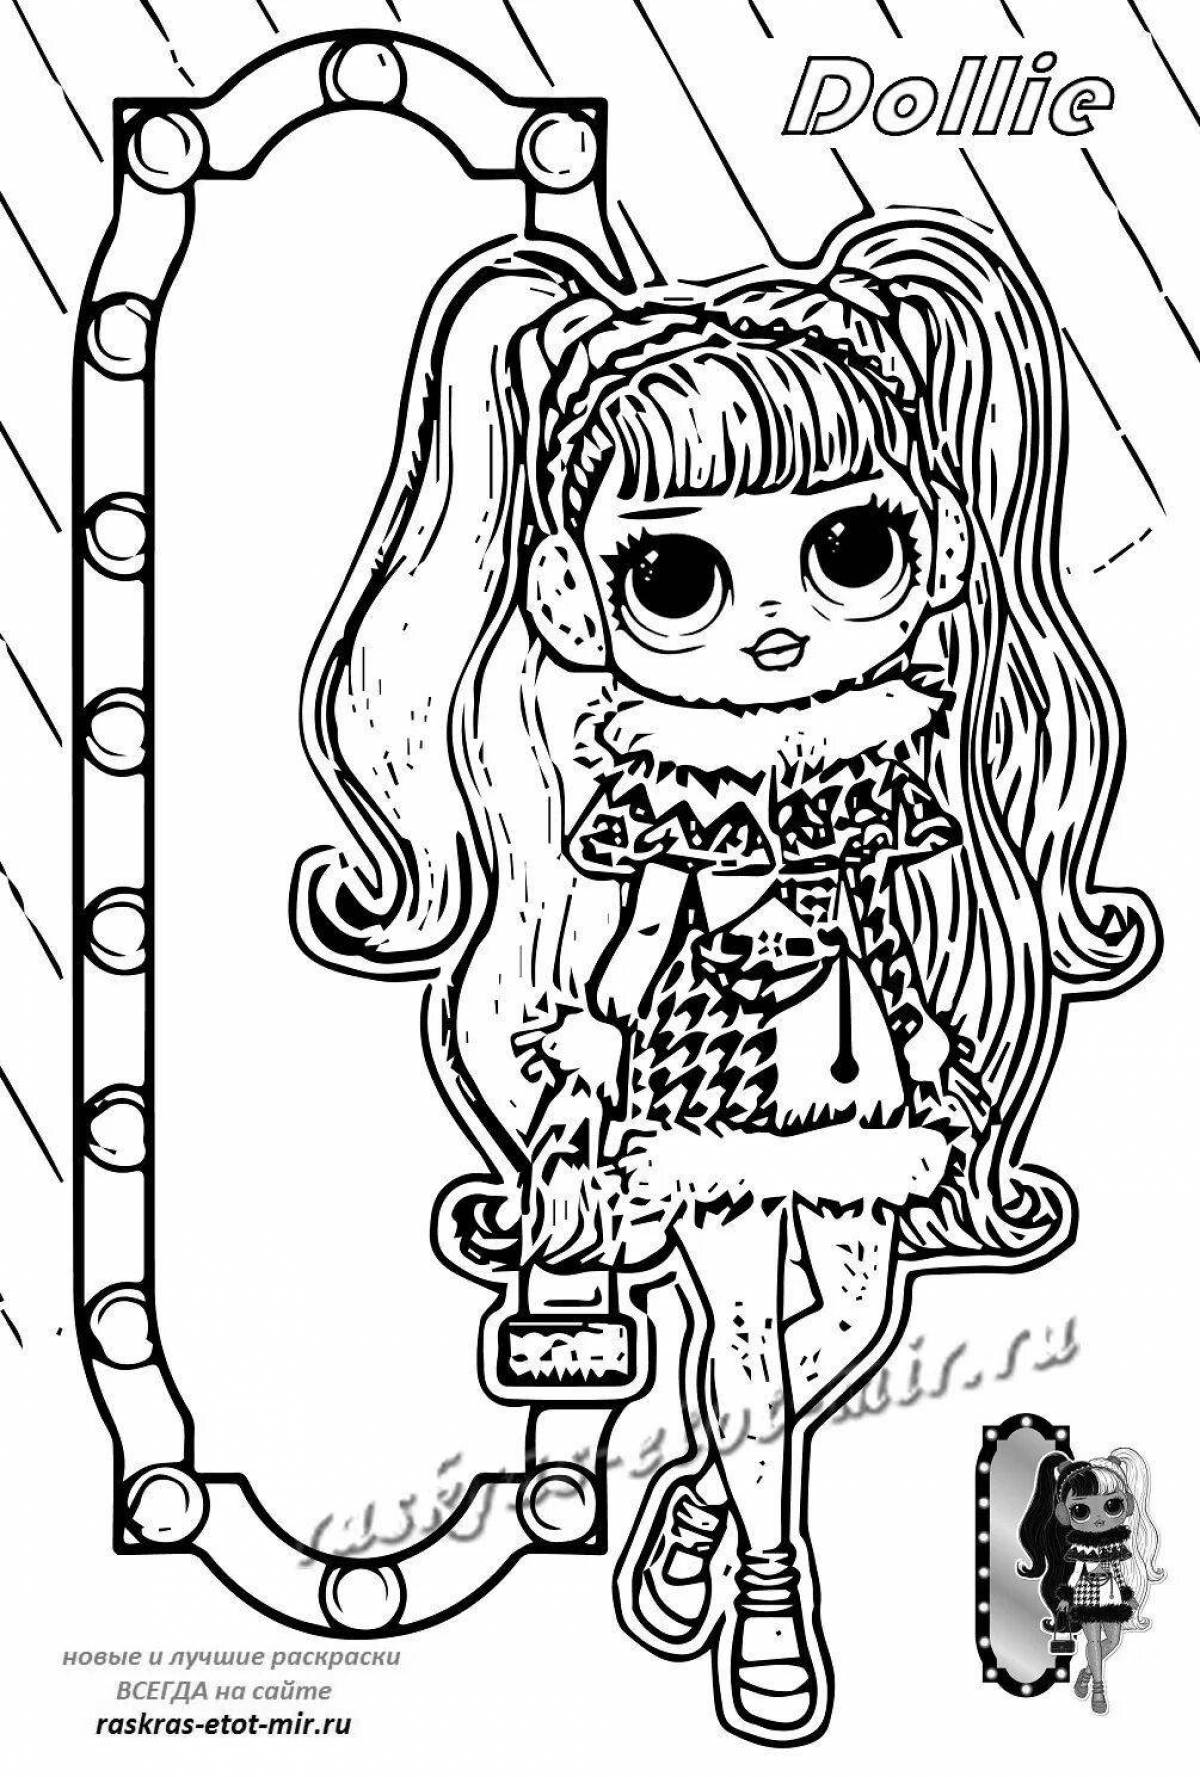 Splendid cave club dolls coloring page